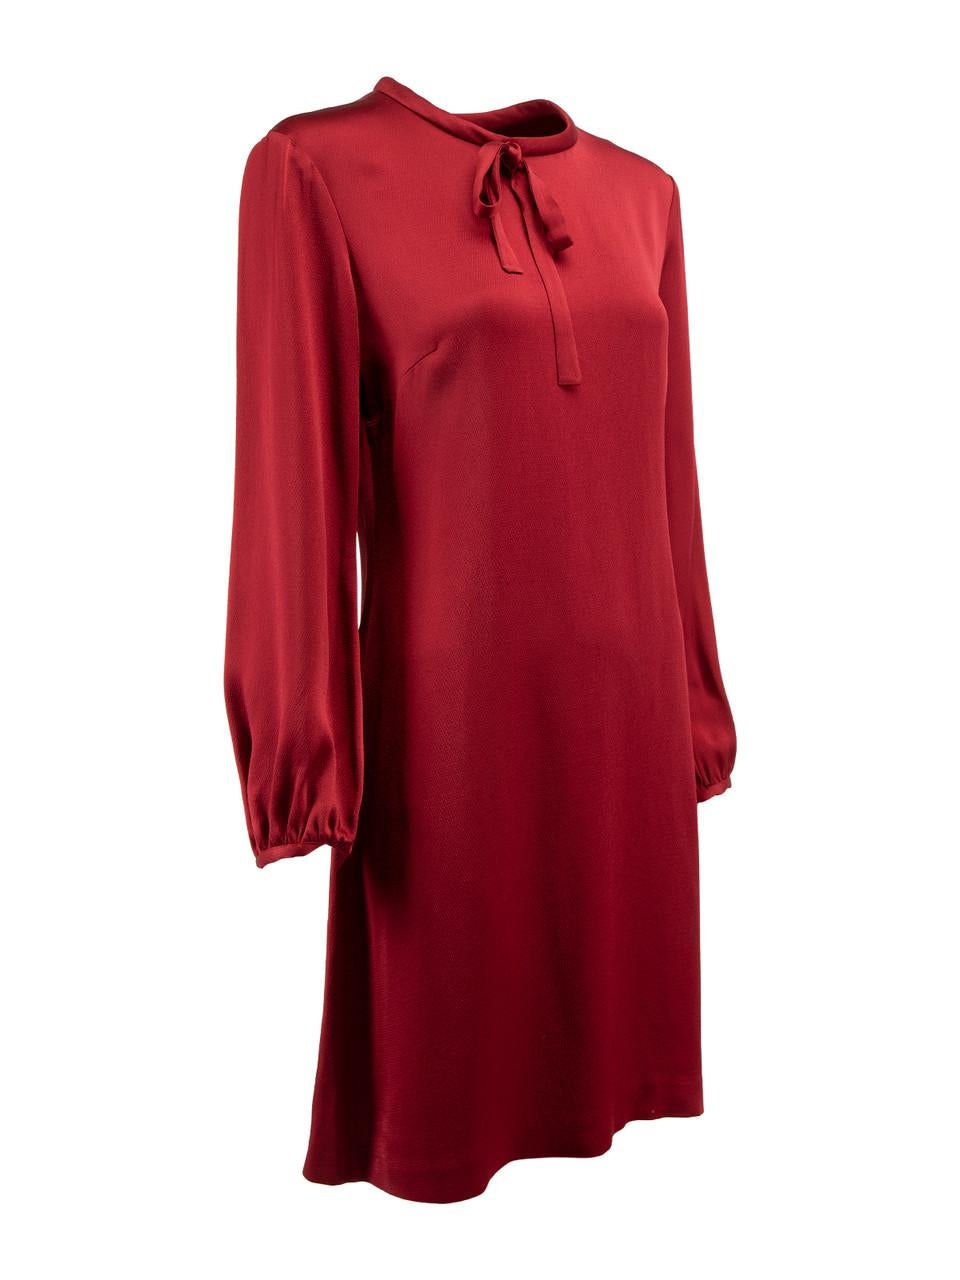 CONDITION is Very good. Minimal wear to dress is evident. Minimal wear to satin exterior where some loos threads and pulls can be seen on this used Tara Jarmon designer resale item. 



Details


Red

Synthetic

Shift dress

Knee length

Round